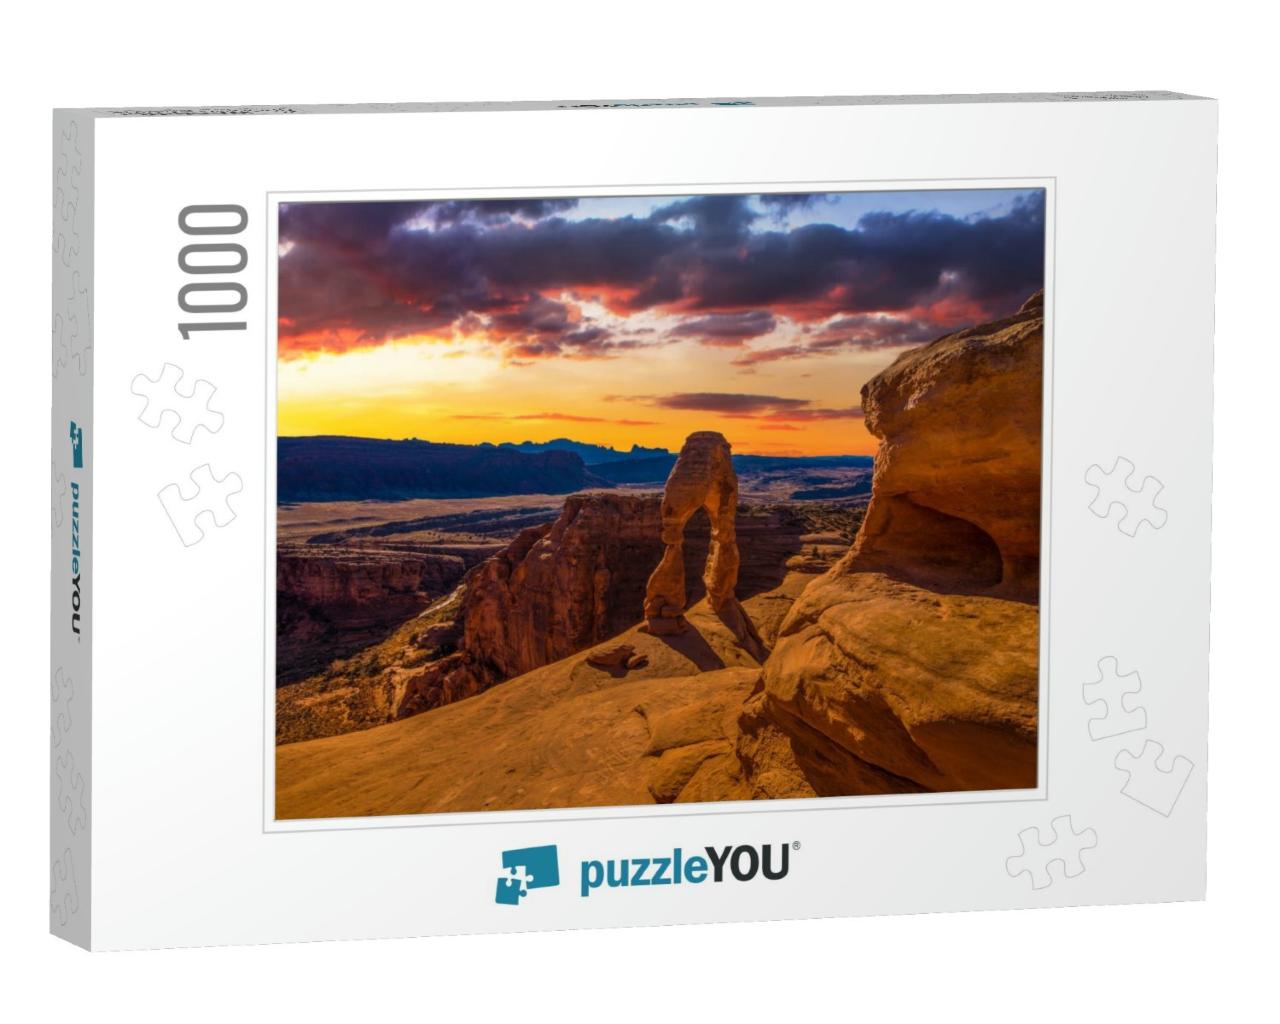 Beautiful Sunset Image Taken At Arches National Park in U... Jigsaw Puzzle with 1000 pieces